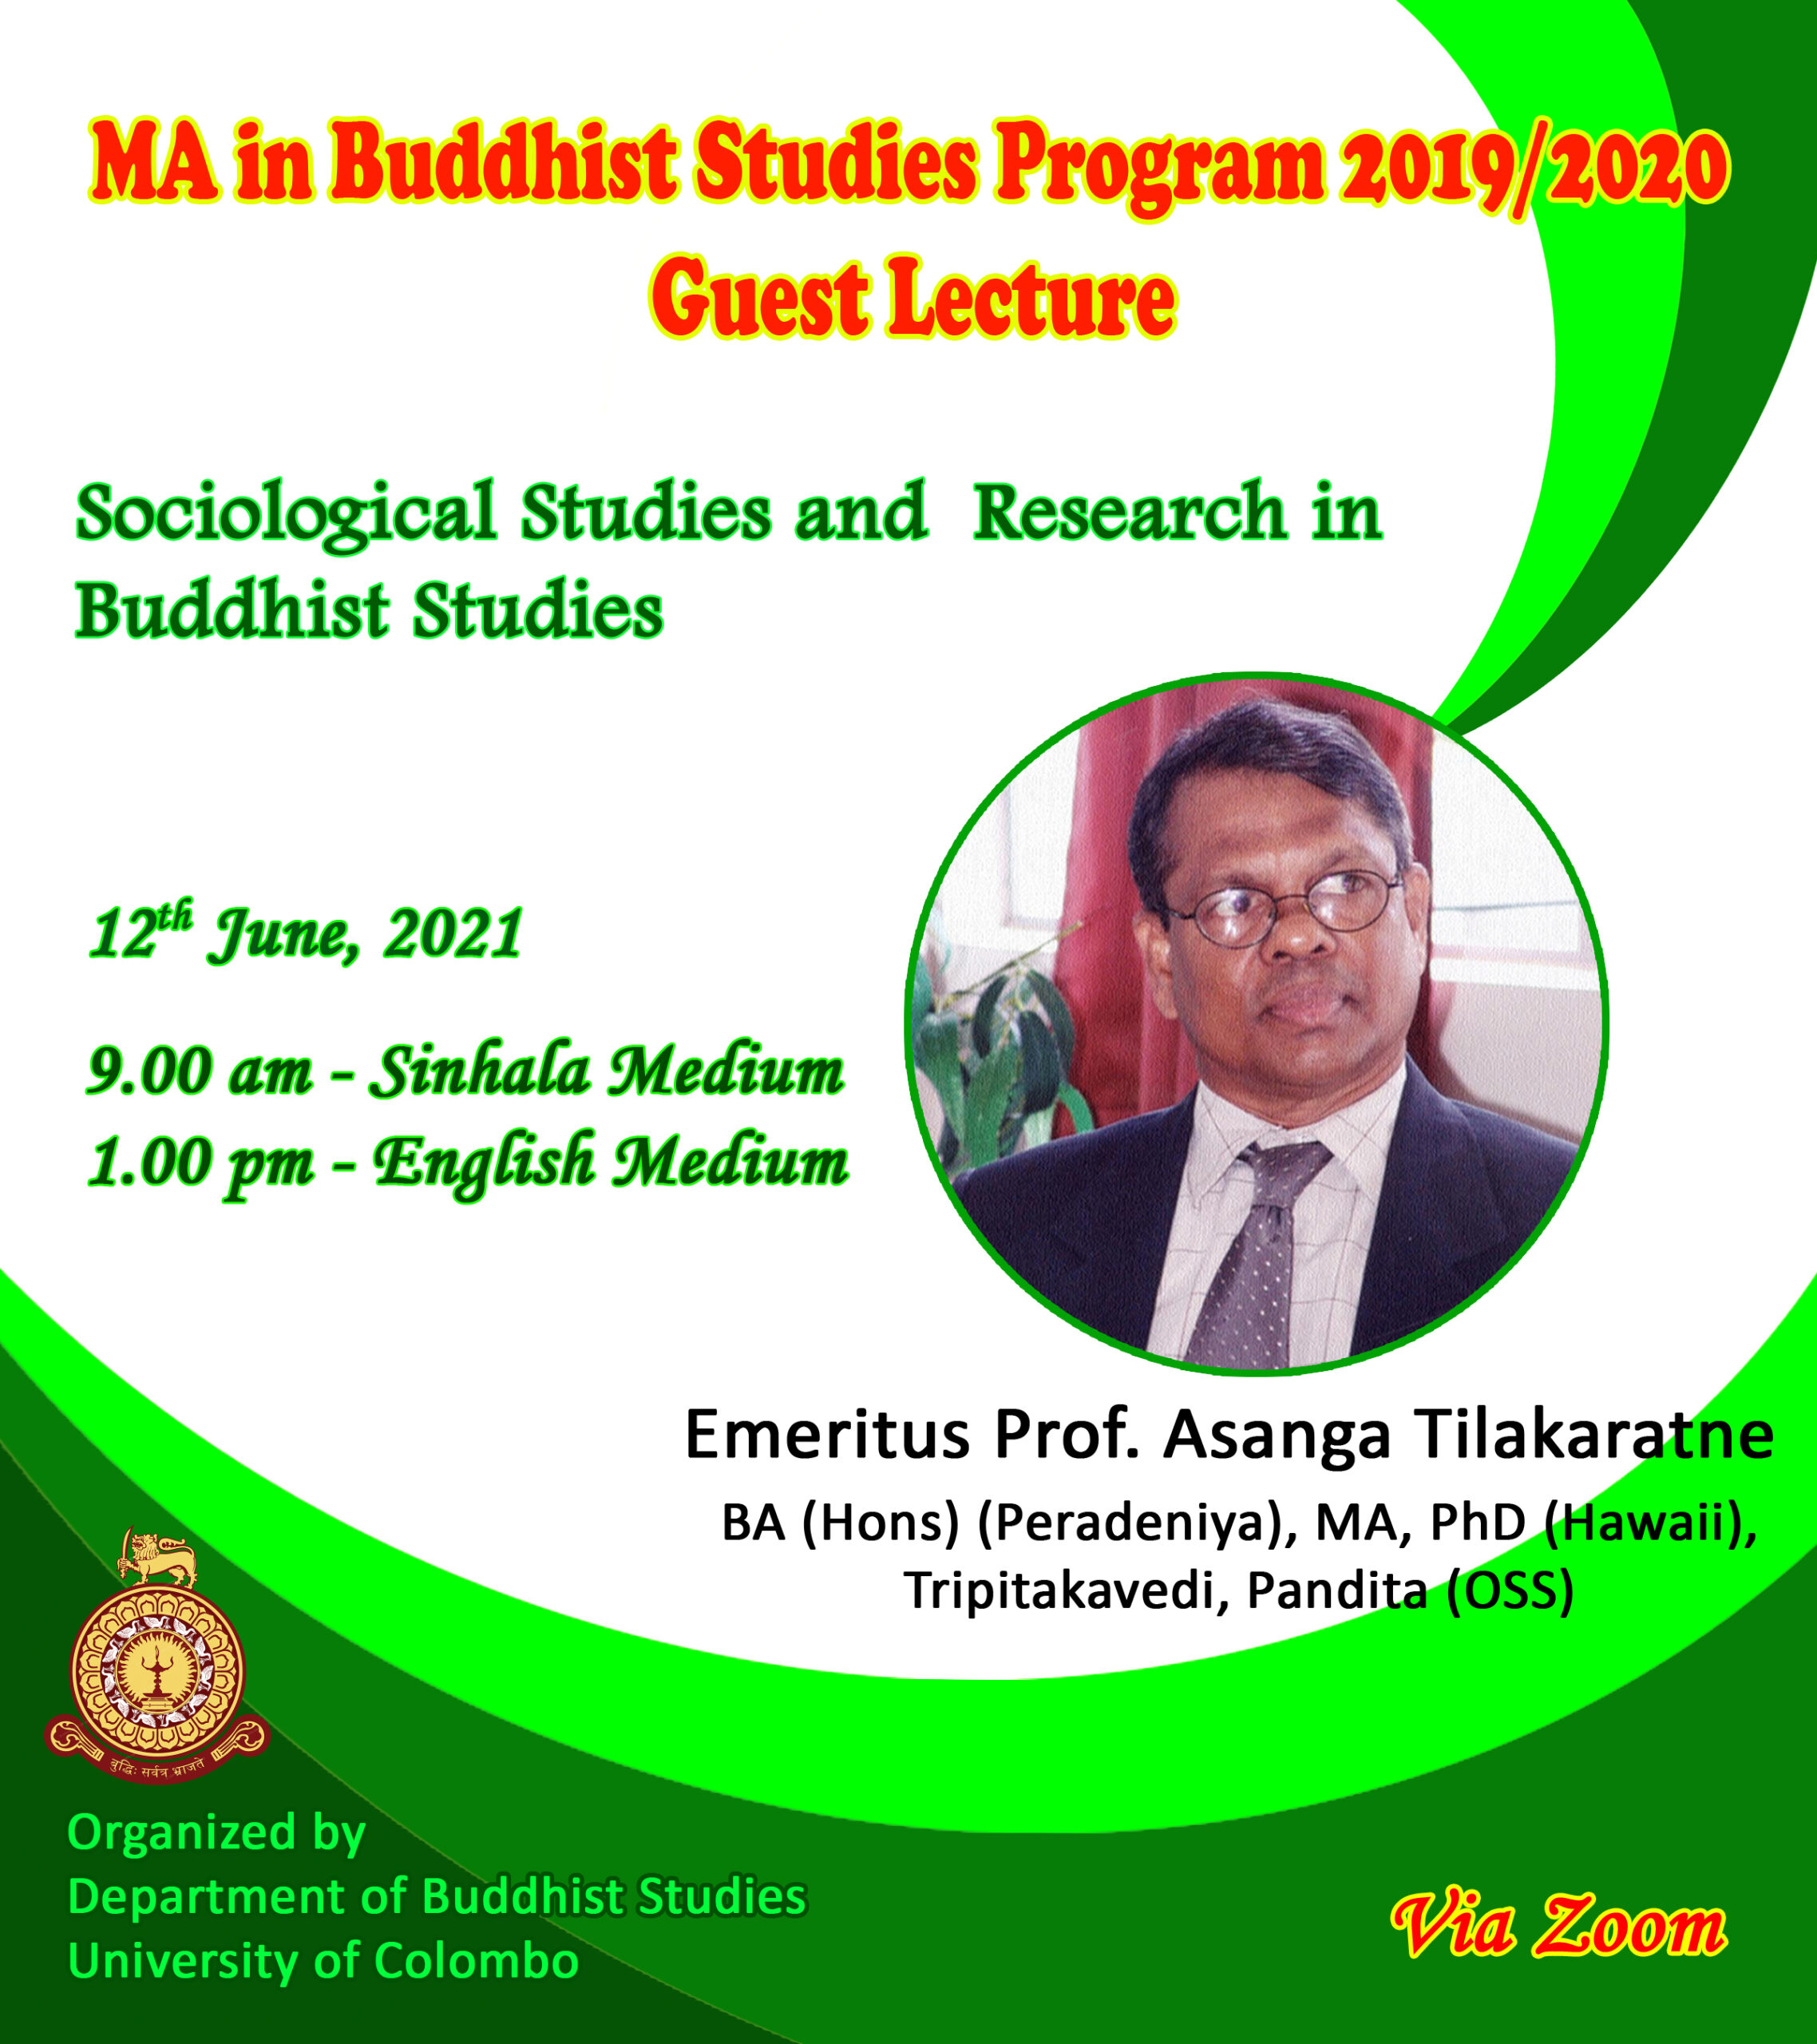 Guest Lecture on ‘Sociological Studies and Research in Buddhist Studies” – 12th June